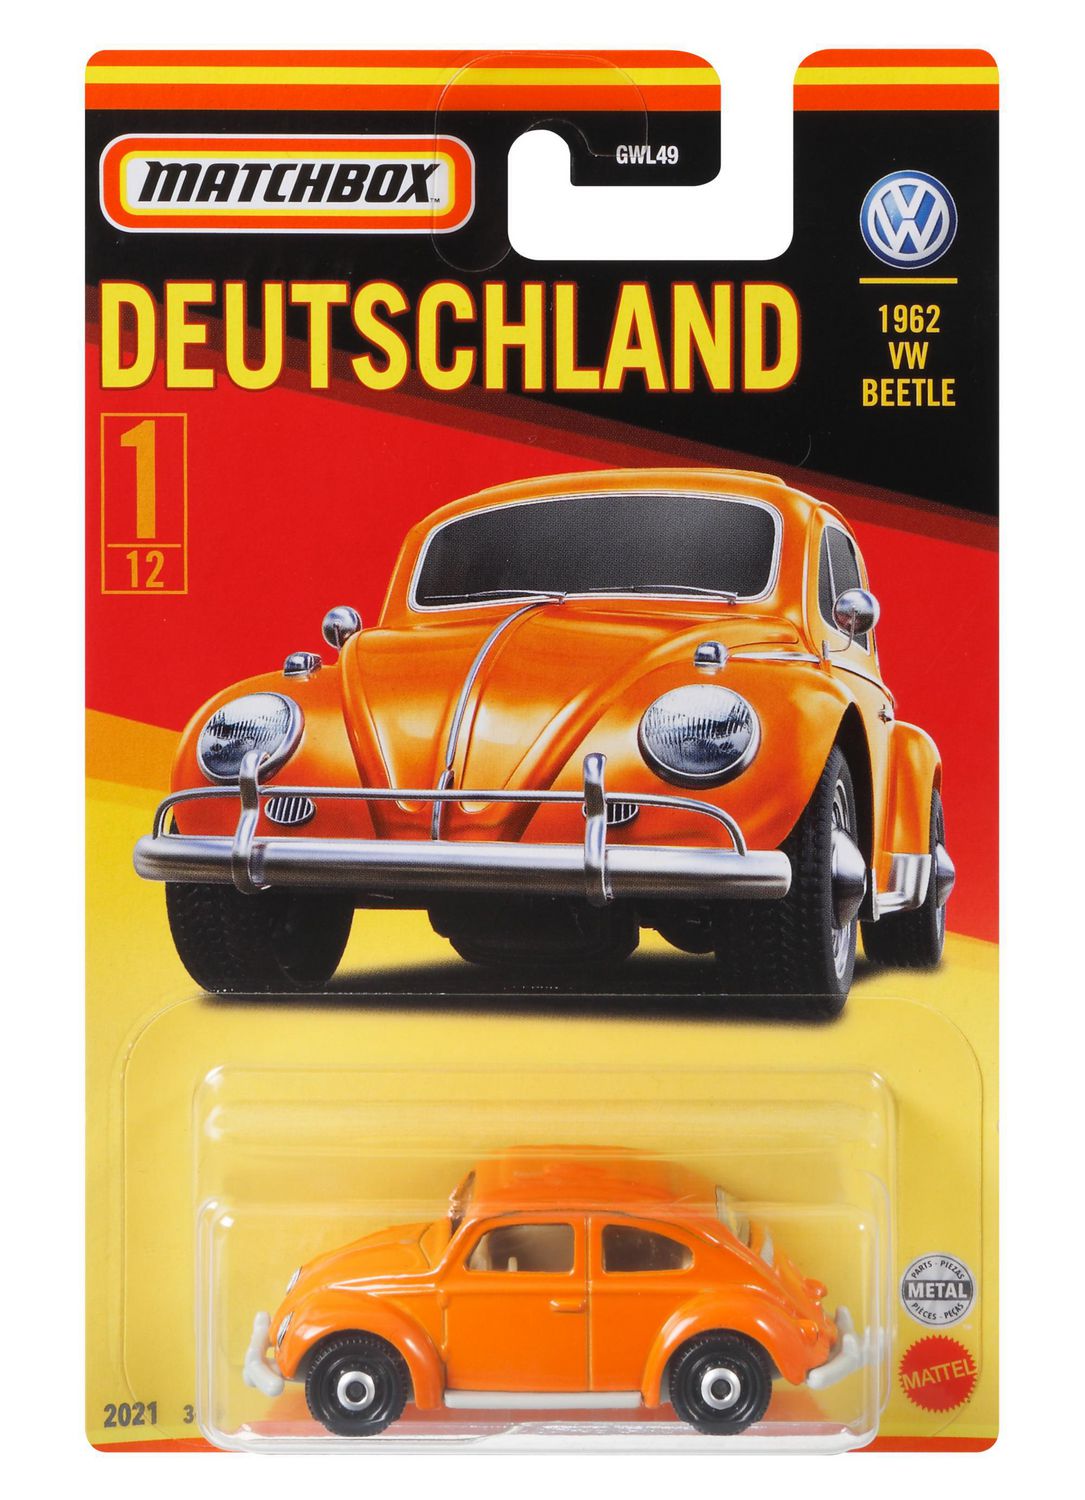 Matchbox Germany Vehicle 1:64 scale German-themed automobiles